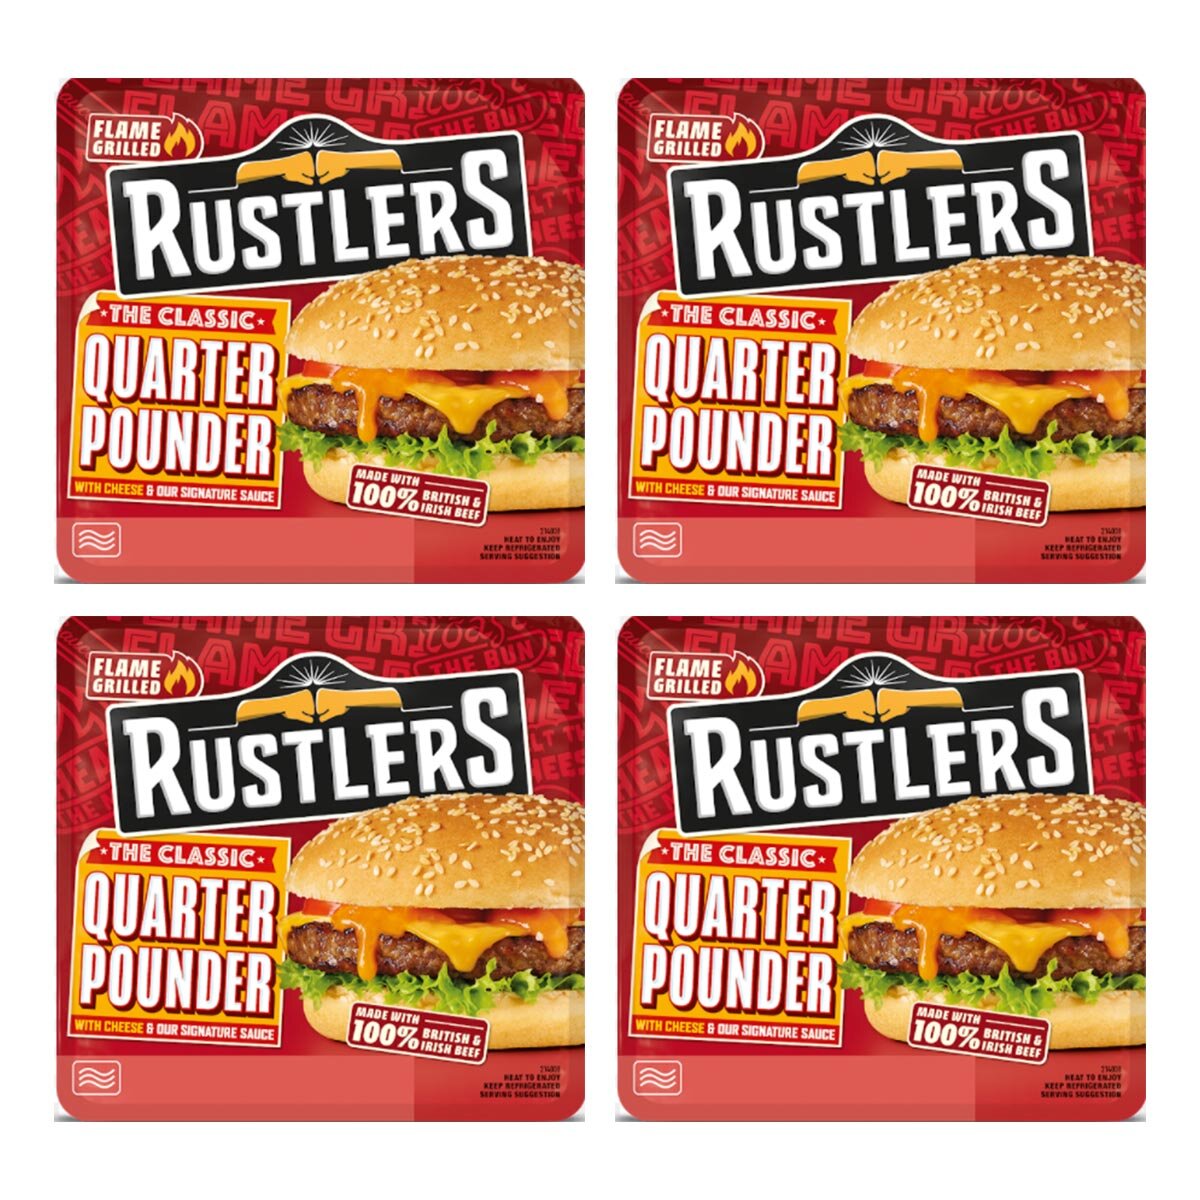 Image of packaging for Rustlers Quater Pounder Burgers